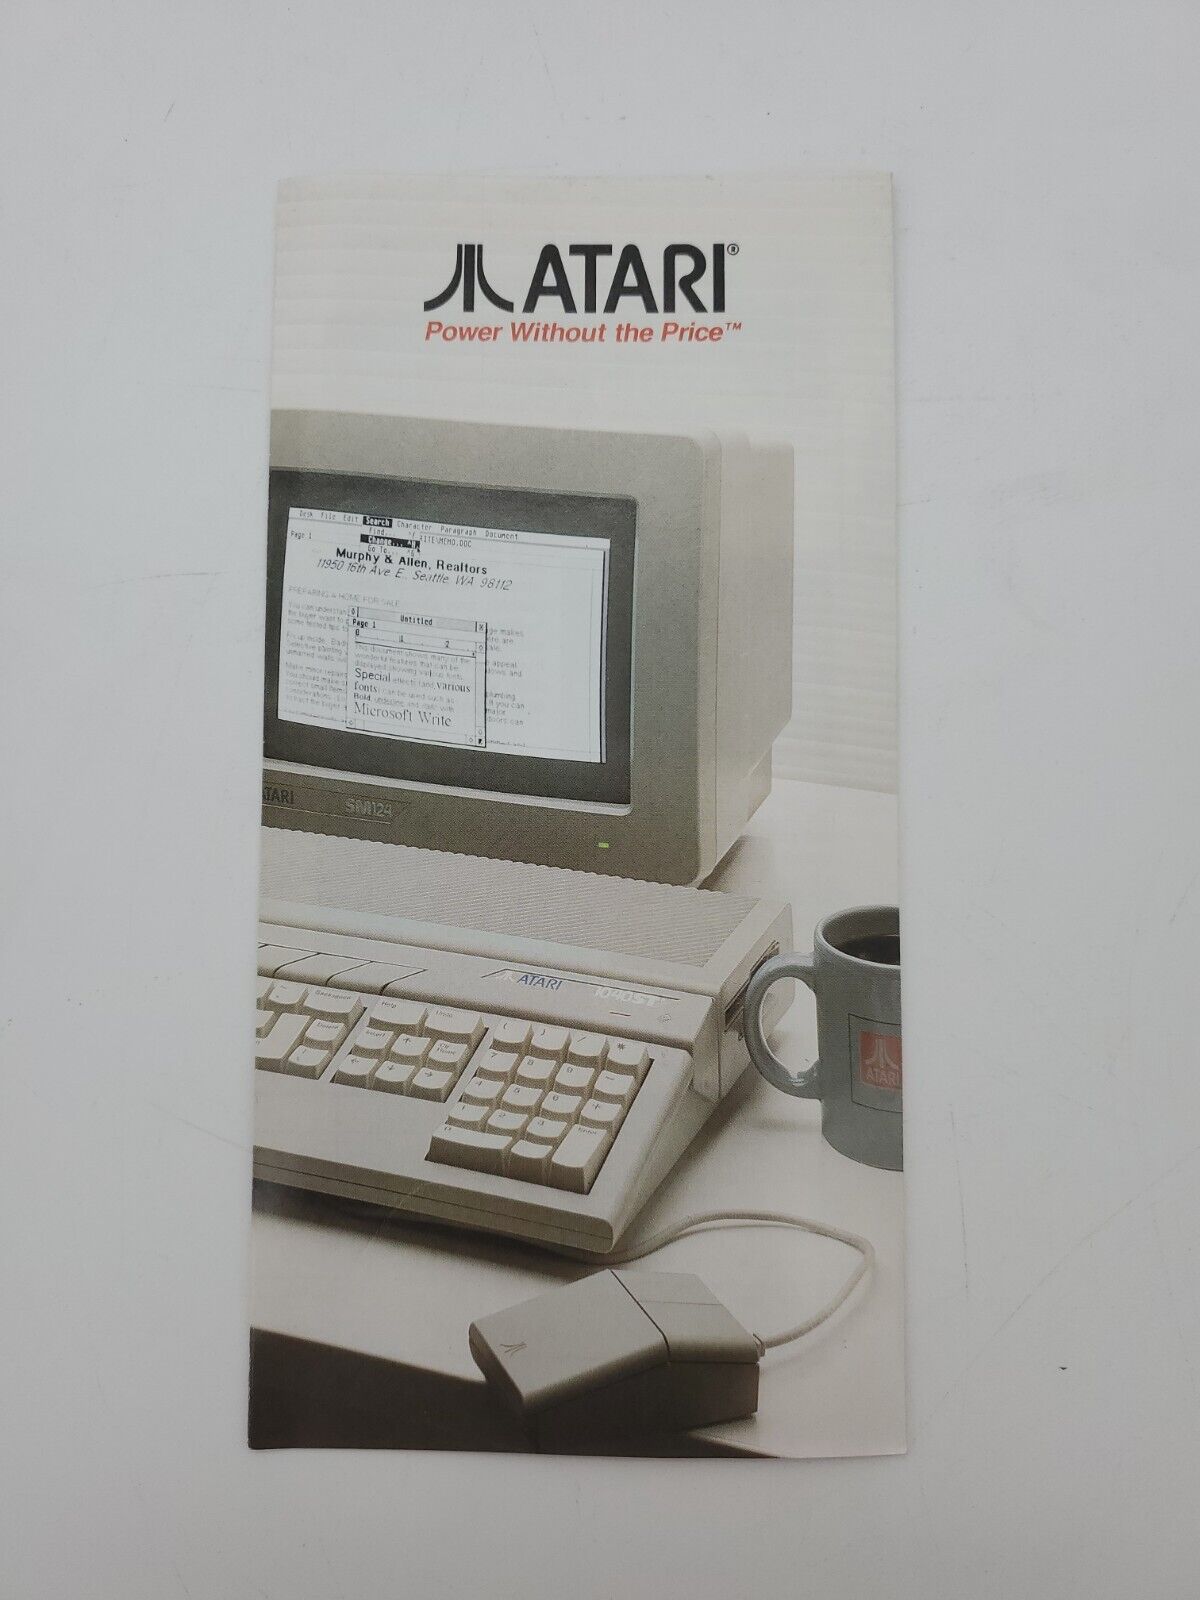 Atari 1040st Sales Brochure Pamphlet Power Without The Price Vintage 80s